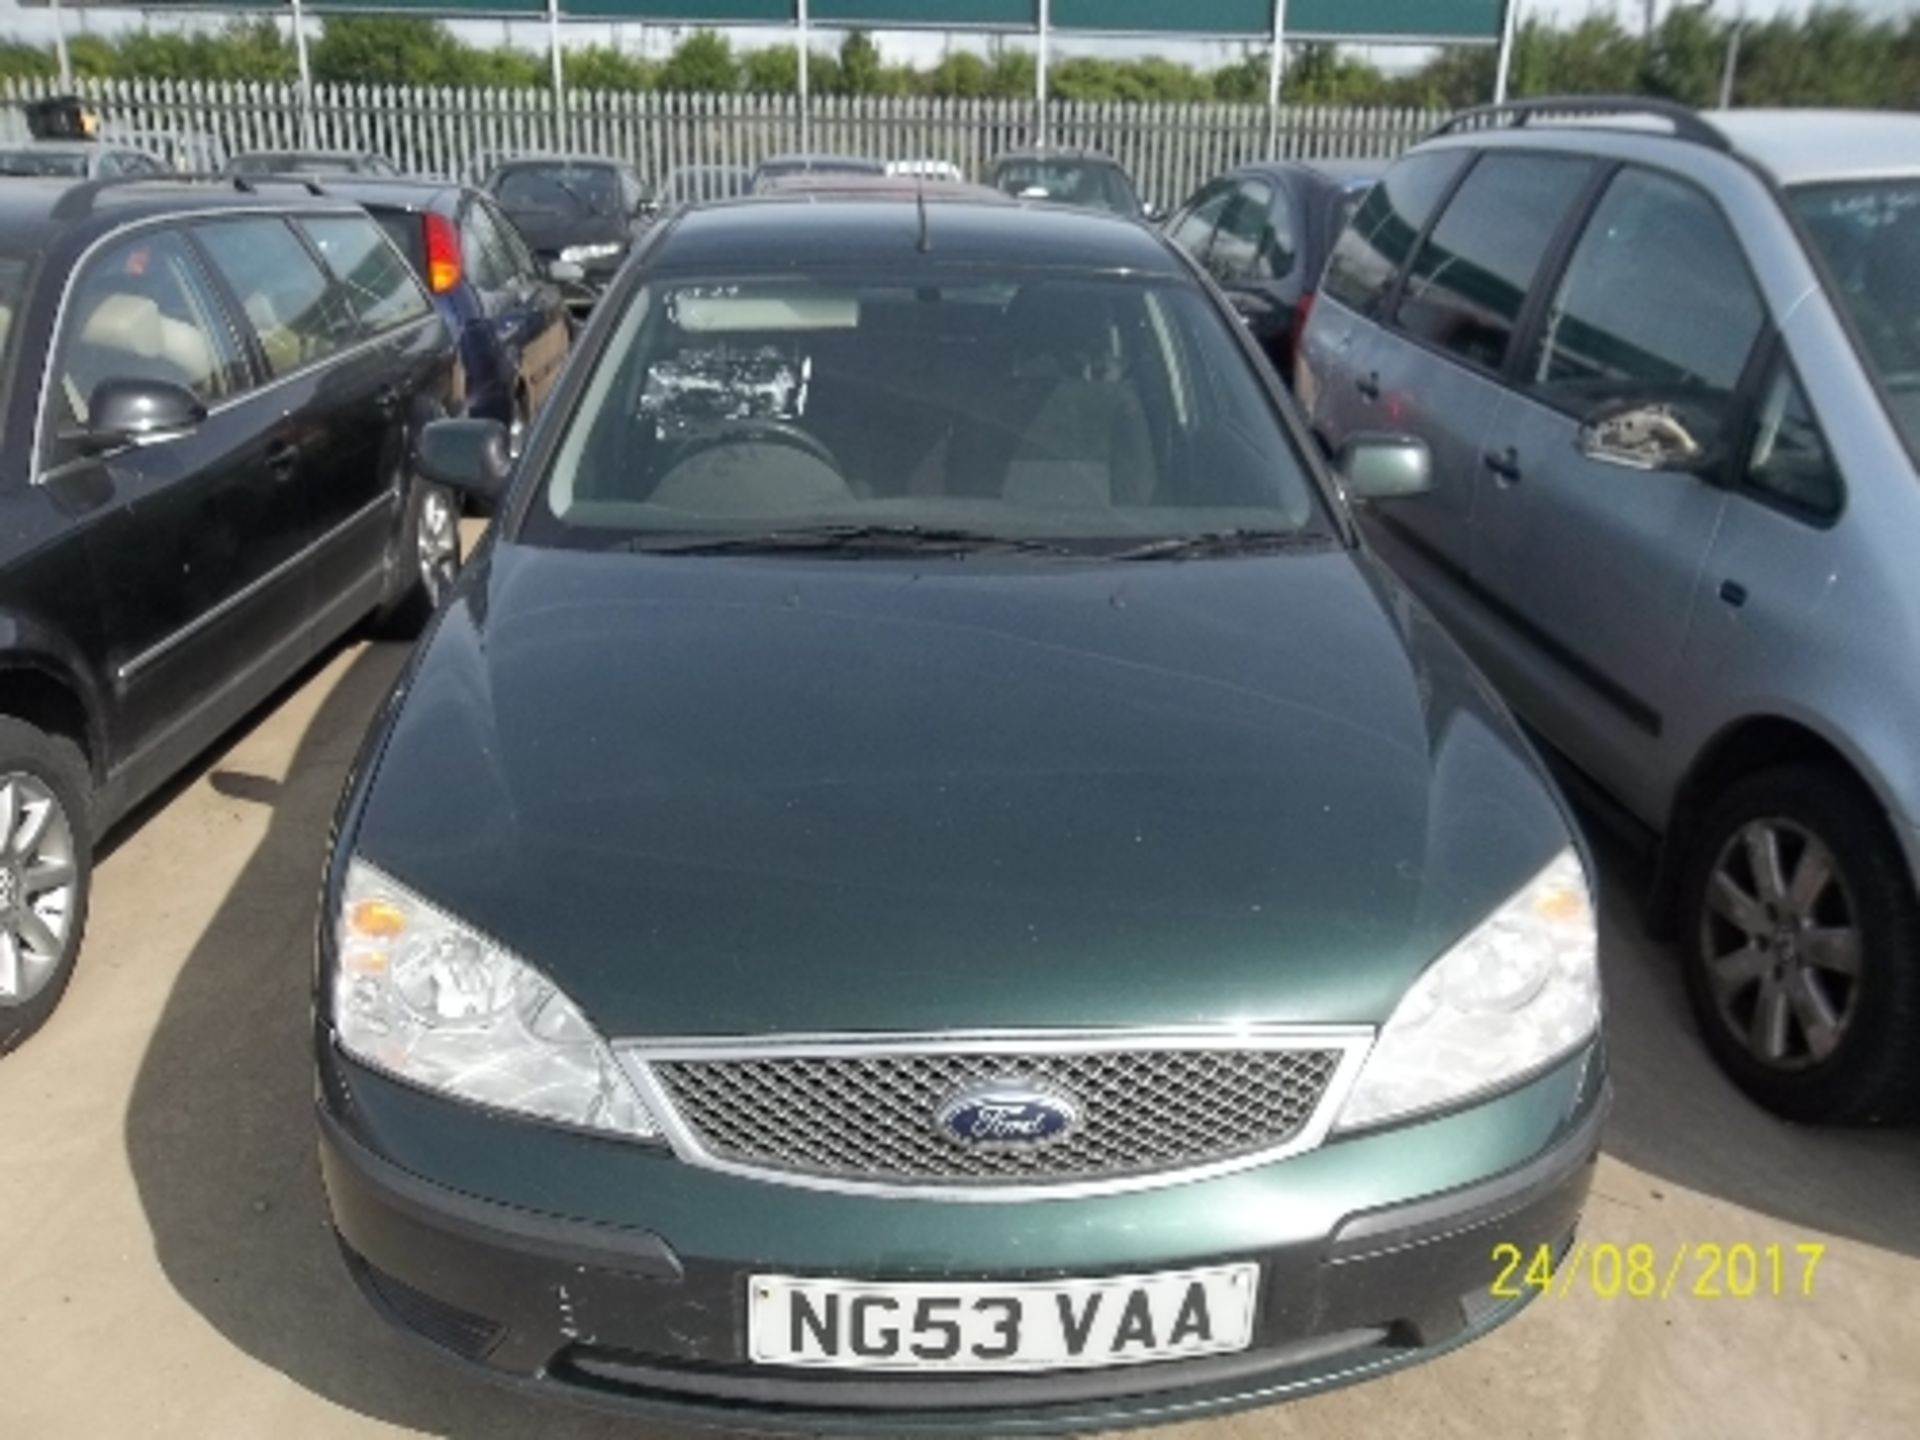 Ford Mondeo LX - NG53 VAA Date of registration: 28.11.2003 1798cc, petrol, manual, green Odometer